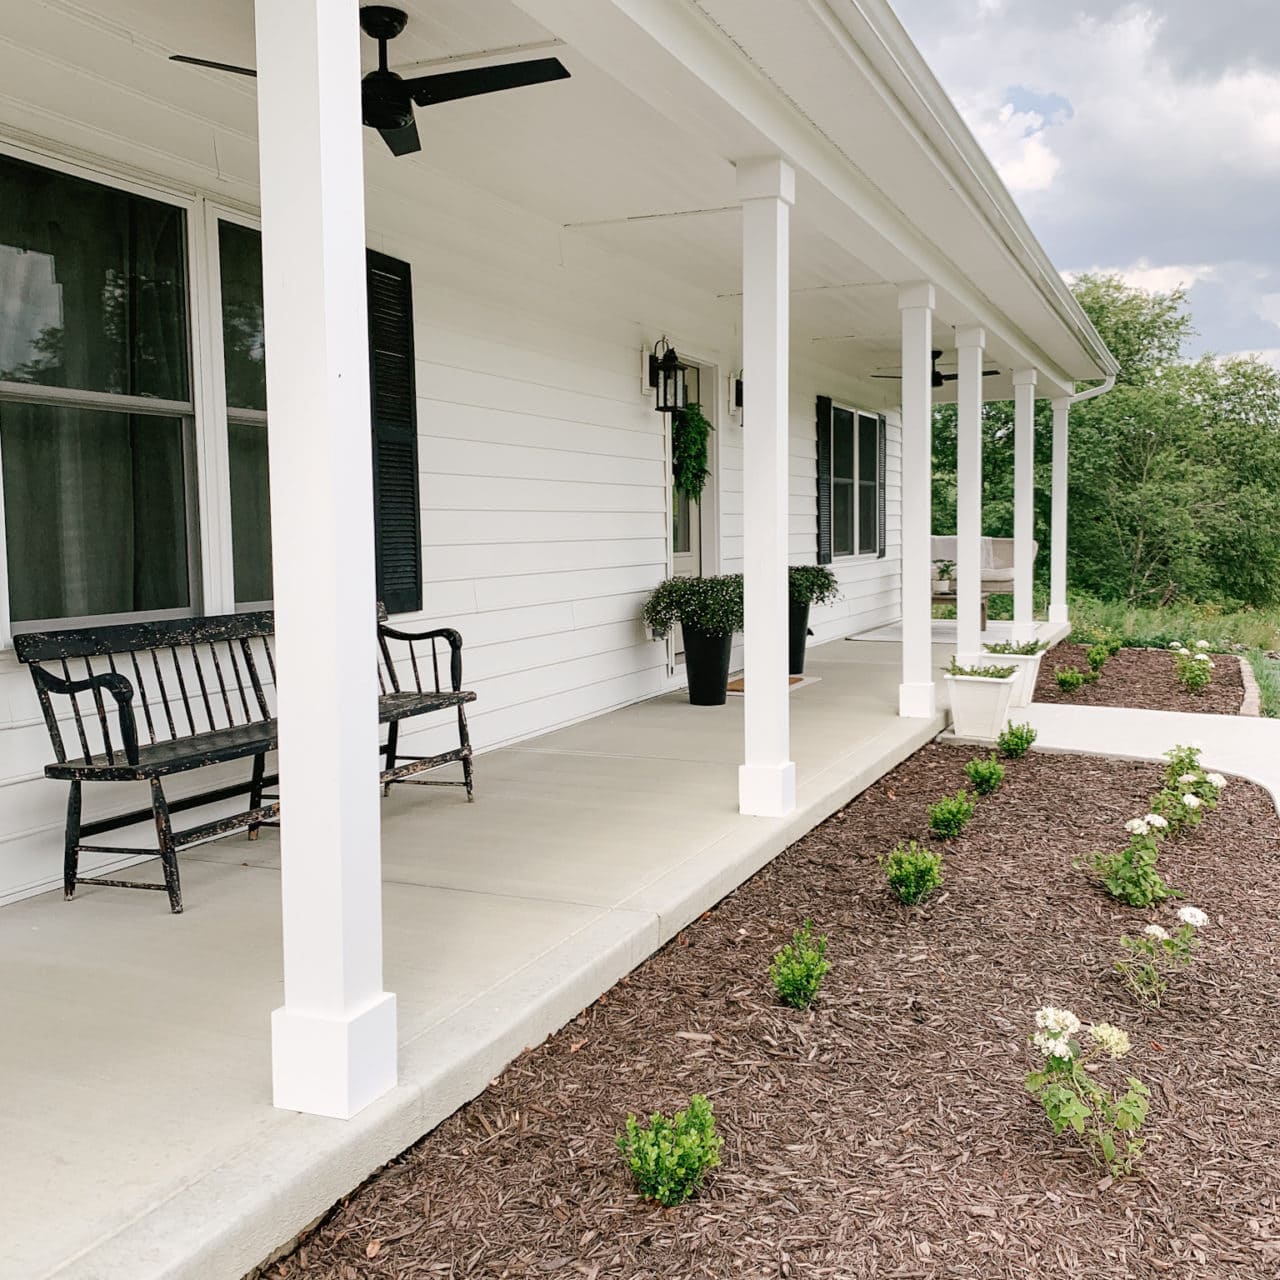 How to Update Skinny Porch Posts with PVC Trim